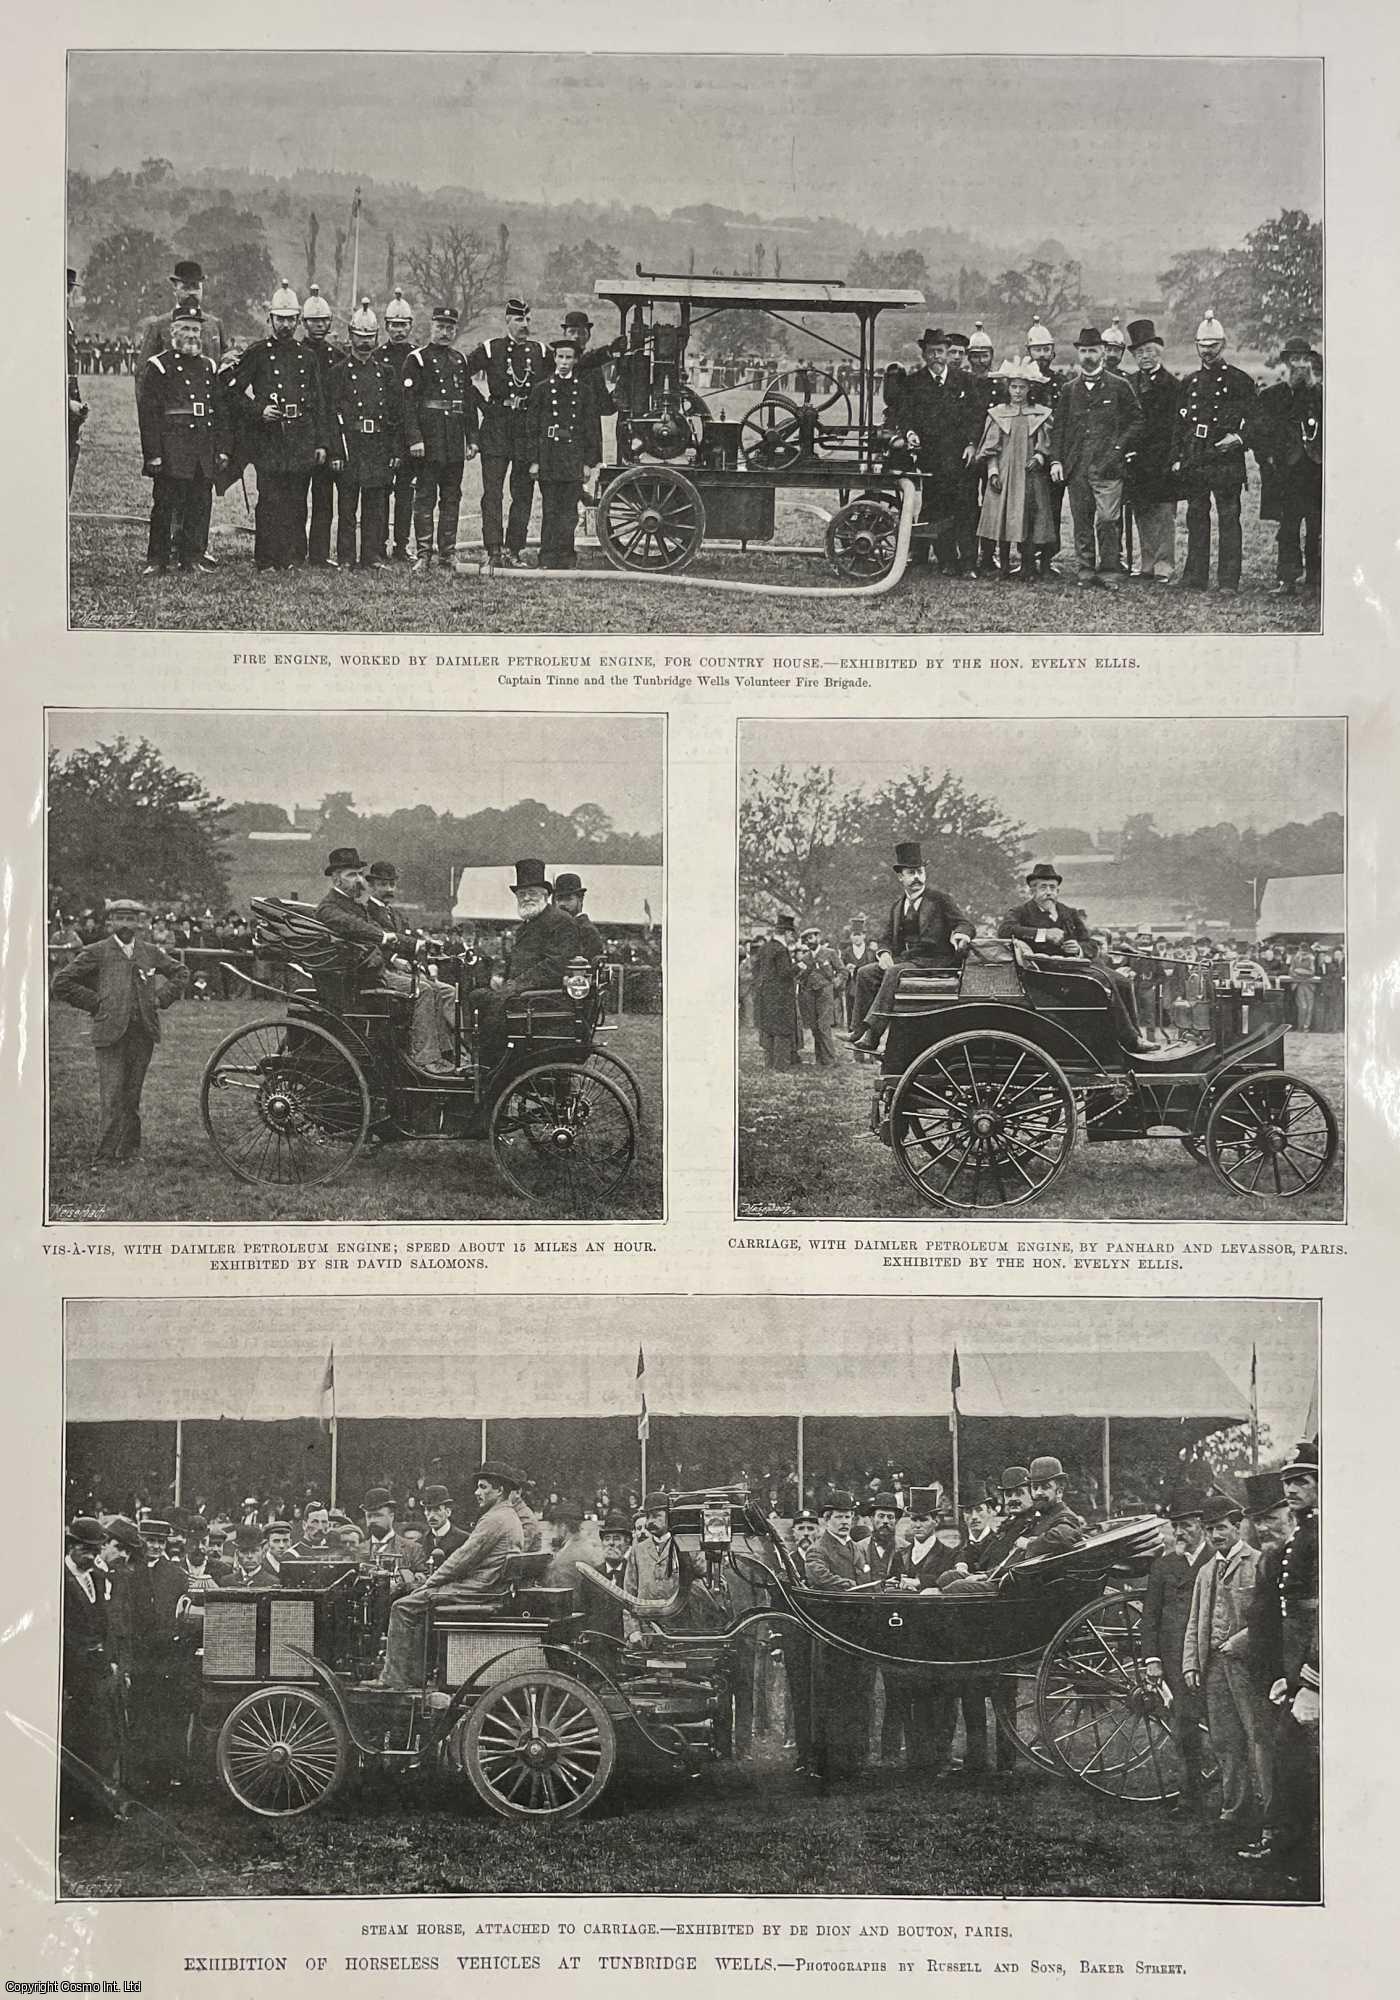 PHOTOGRAPHS BY RUSSELL AND SONS, BAKER STREET - Exhibition of Horseless Vehicles at Tunbridge Wells. An original print from the Illustrated London News, 1895.